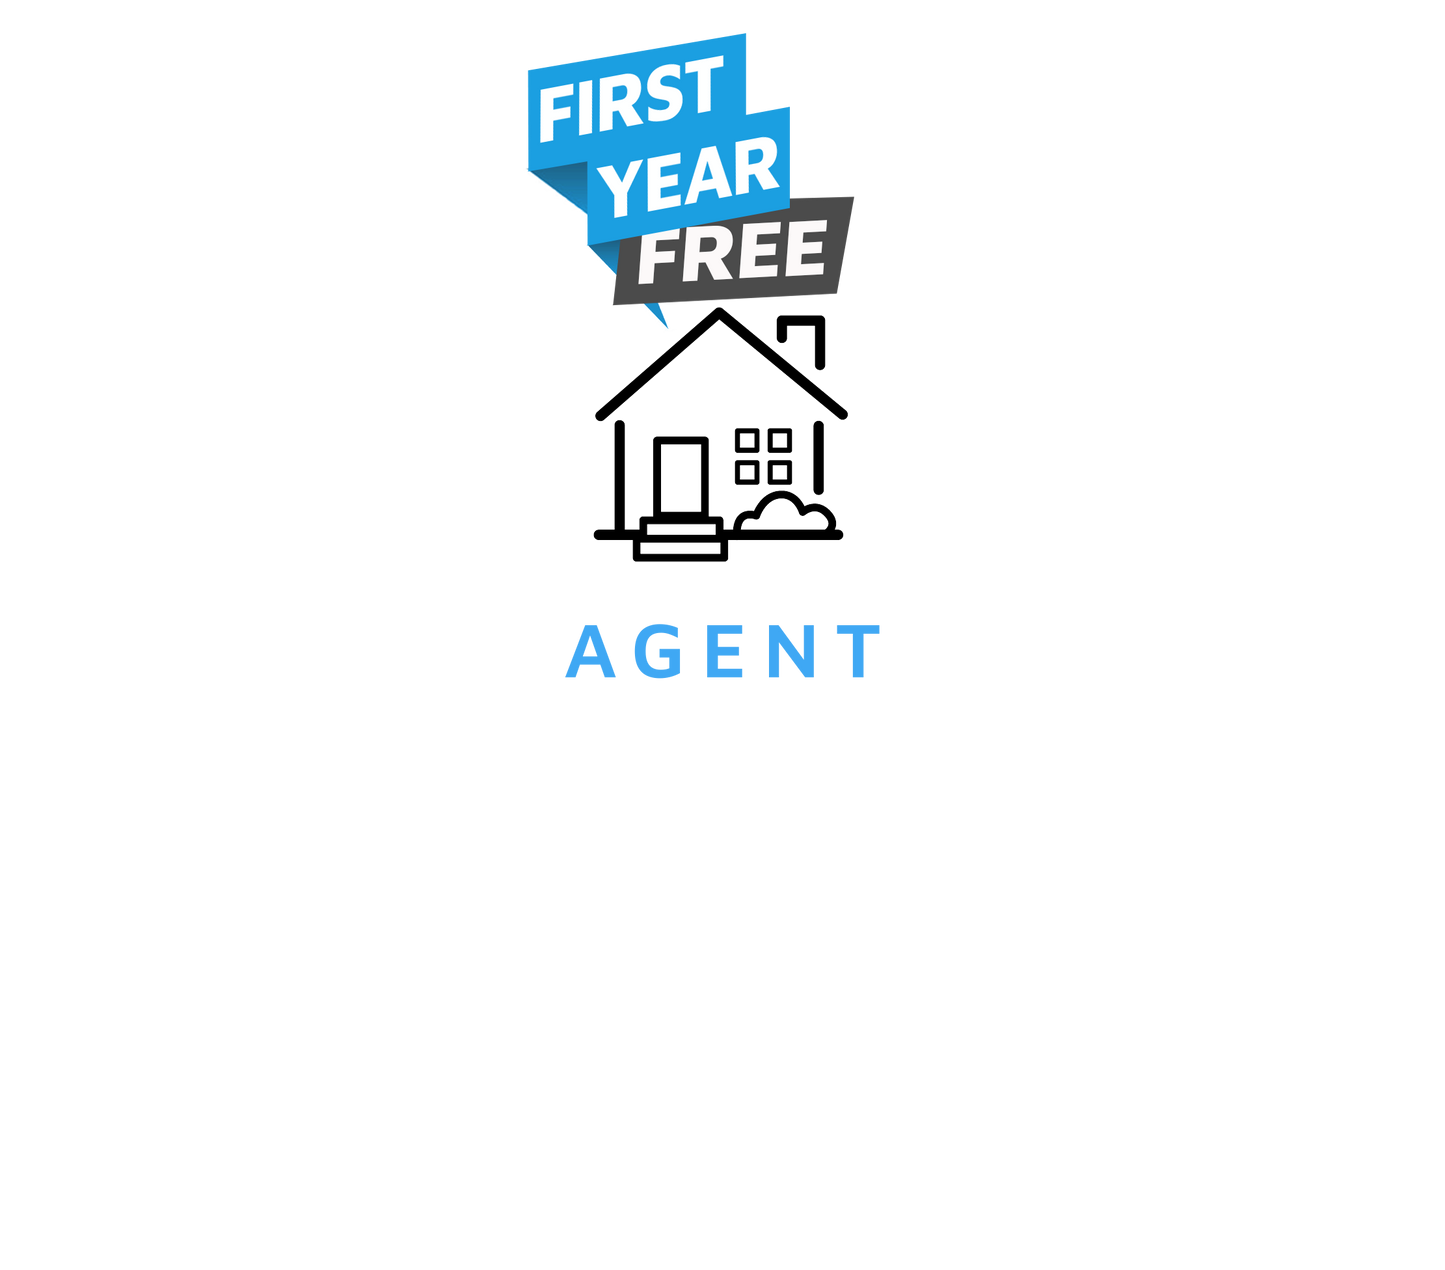 FIRST YEAR FREE - Agent - use code T329